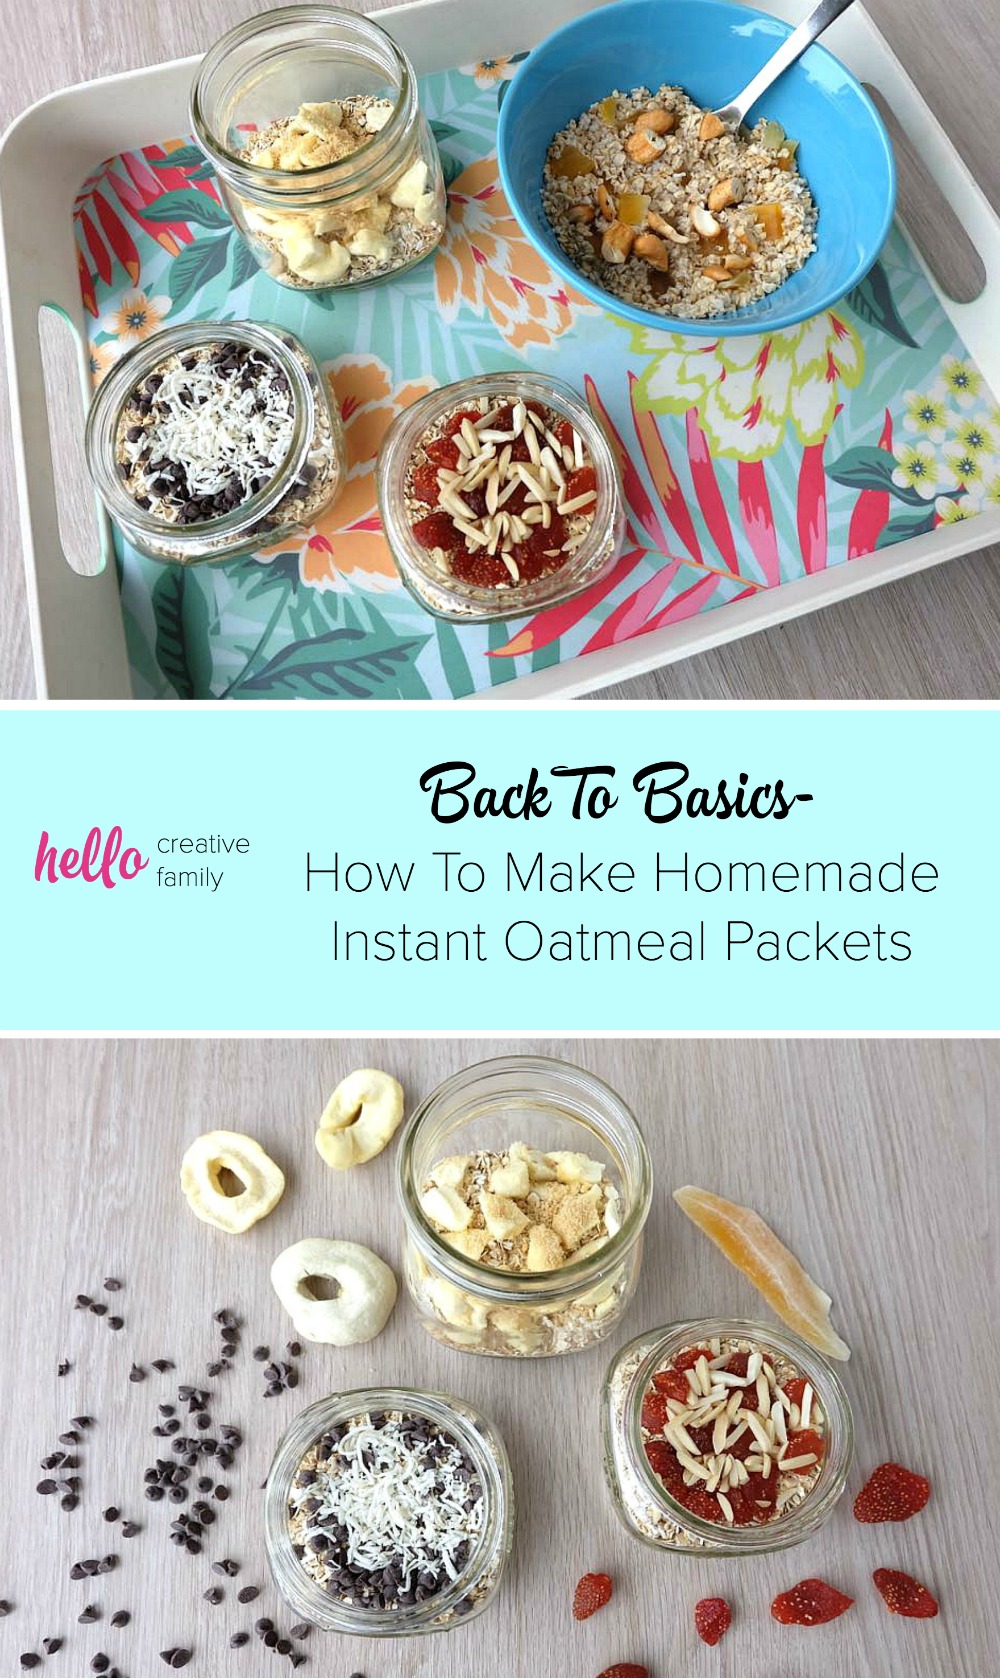 Breakfast meal planning just got easy! Get kids cooking with this easy tutorial on how to make homemade instant oatmeal packets! Set up a table with all the toppings and let kids pre make their breakfast for the week! Includes ideas for delicious oatmeal toppings! 